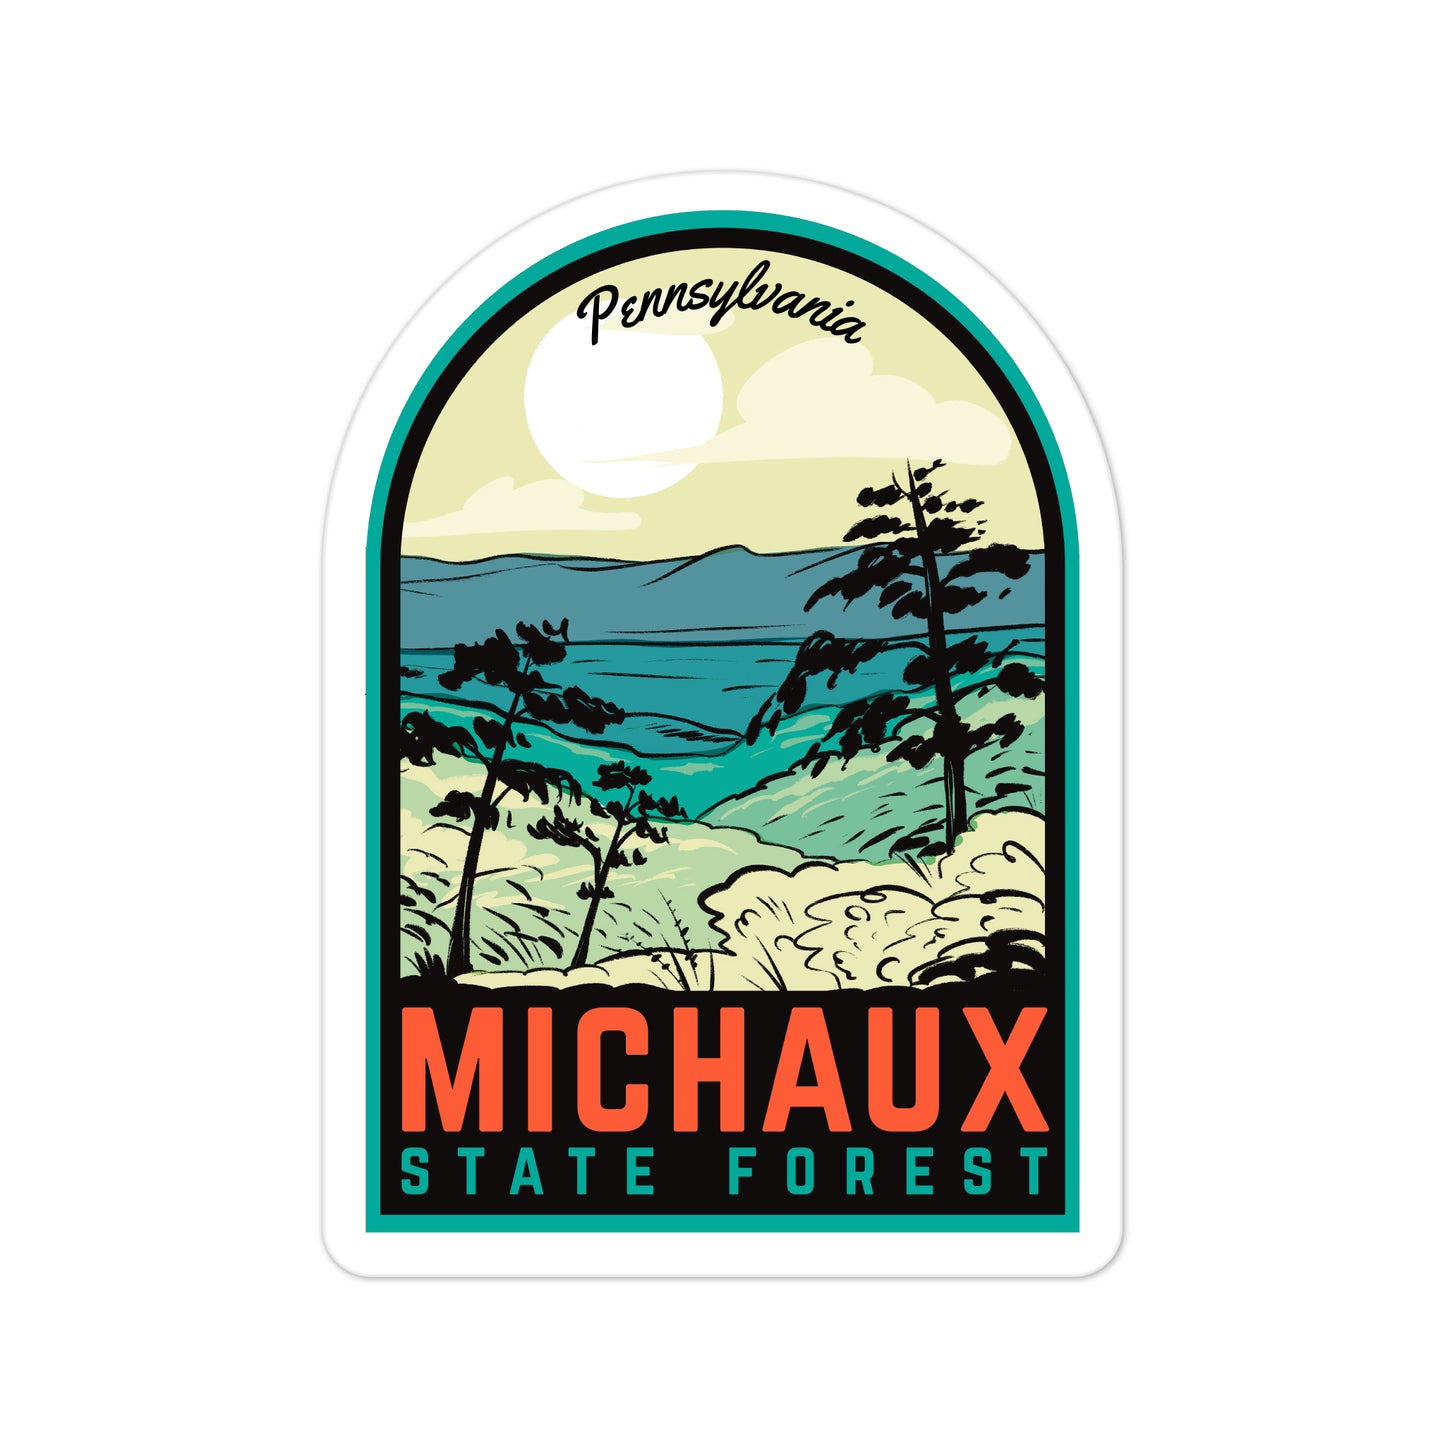 A sticker of Michaux State Forest